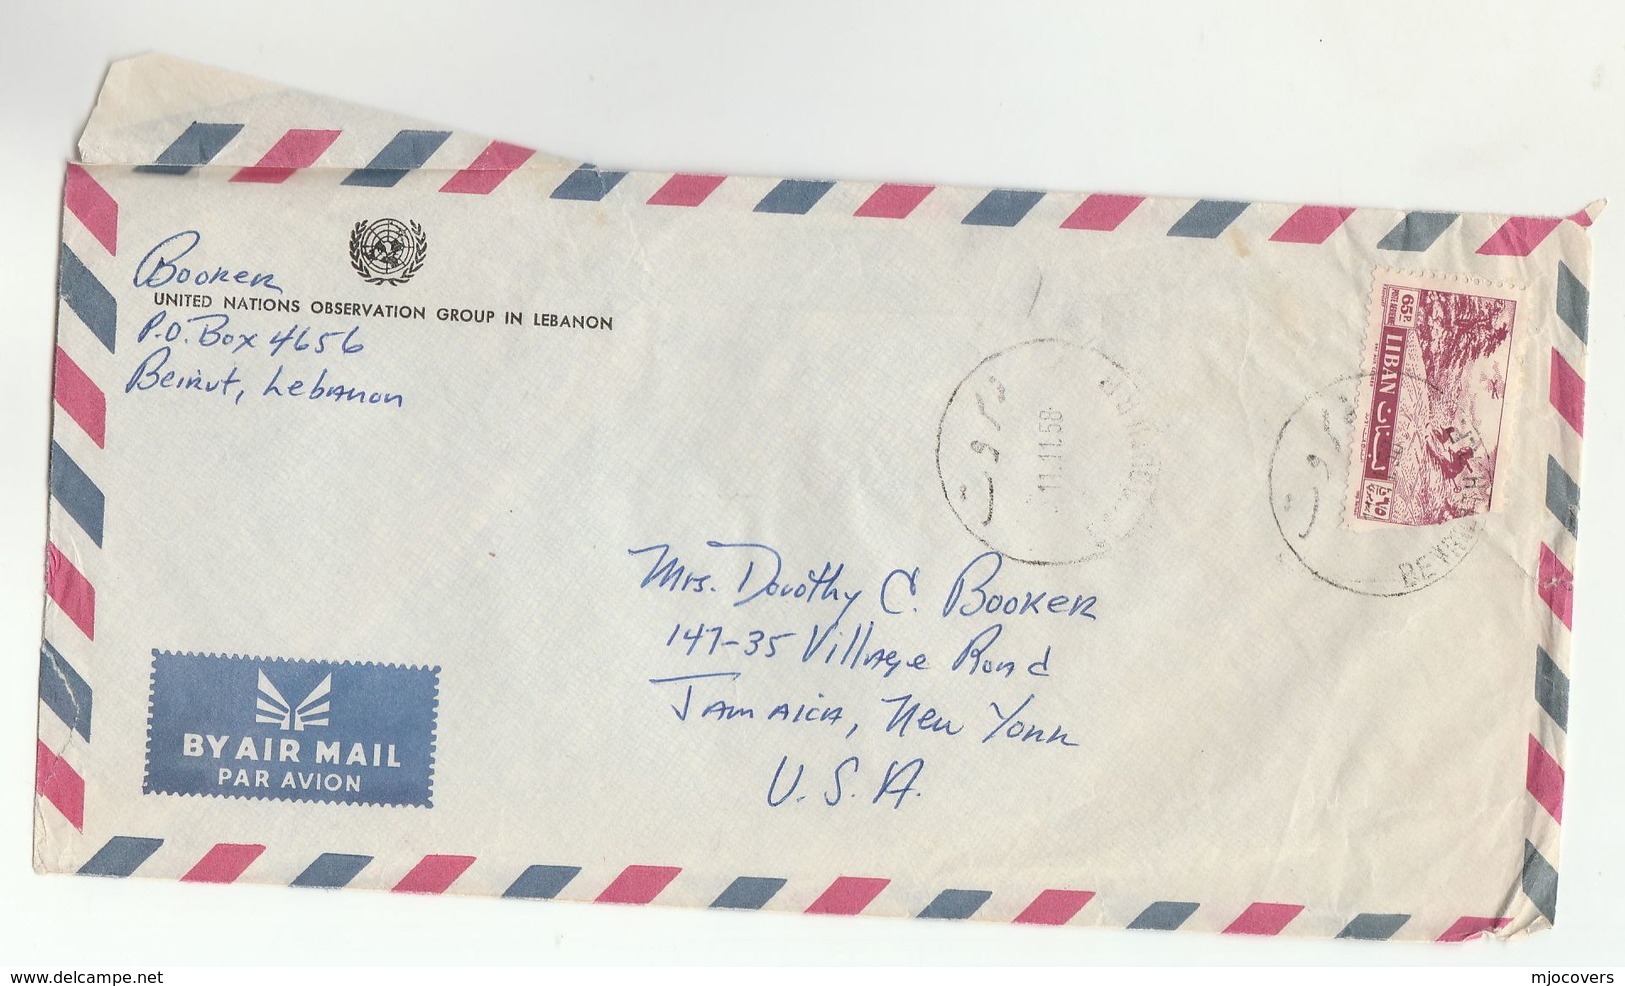 1958 LEBANON UNOGL Forces UN OBSERVER GROUP IN LEBANON Airmail COVER To USA United Nations - Lebanon